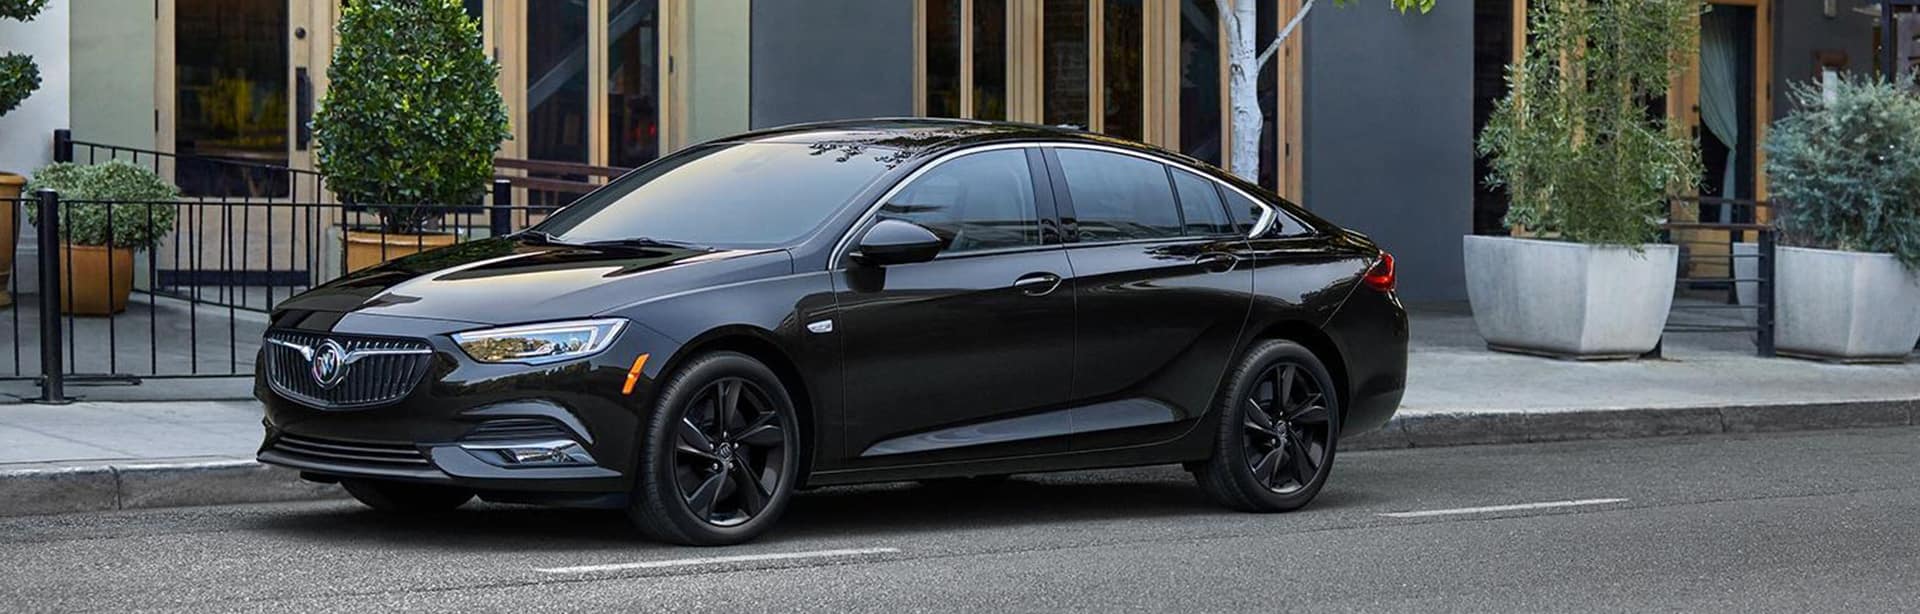 The 2020 Buick Regal Sportback: Drive With Confidence in West Palm Beach, FL